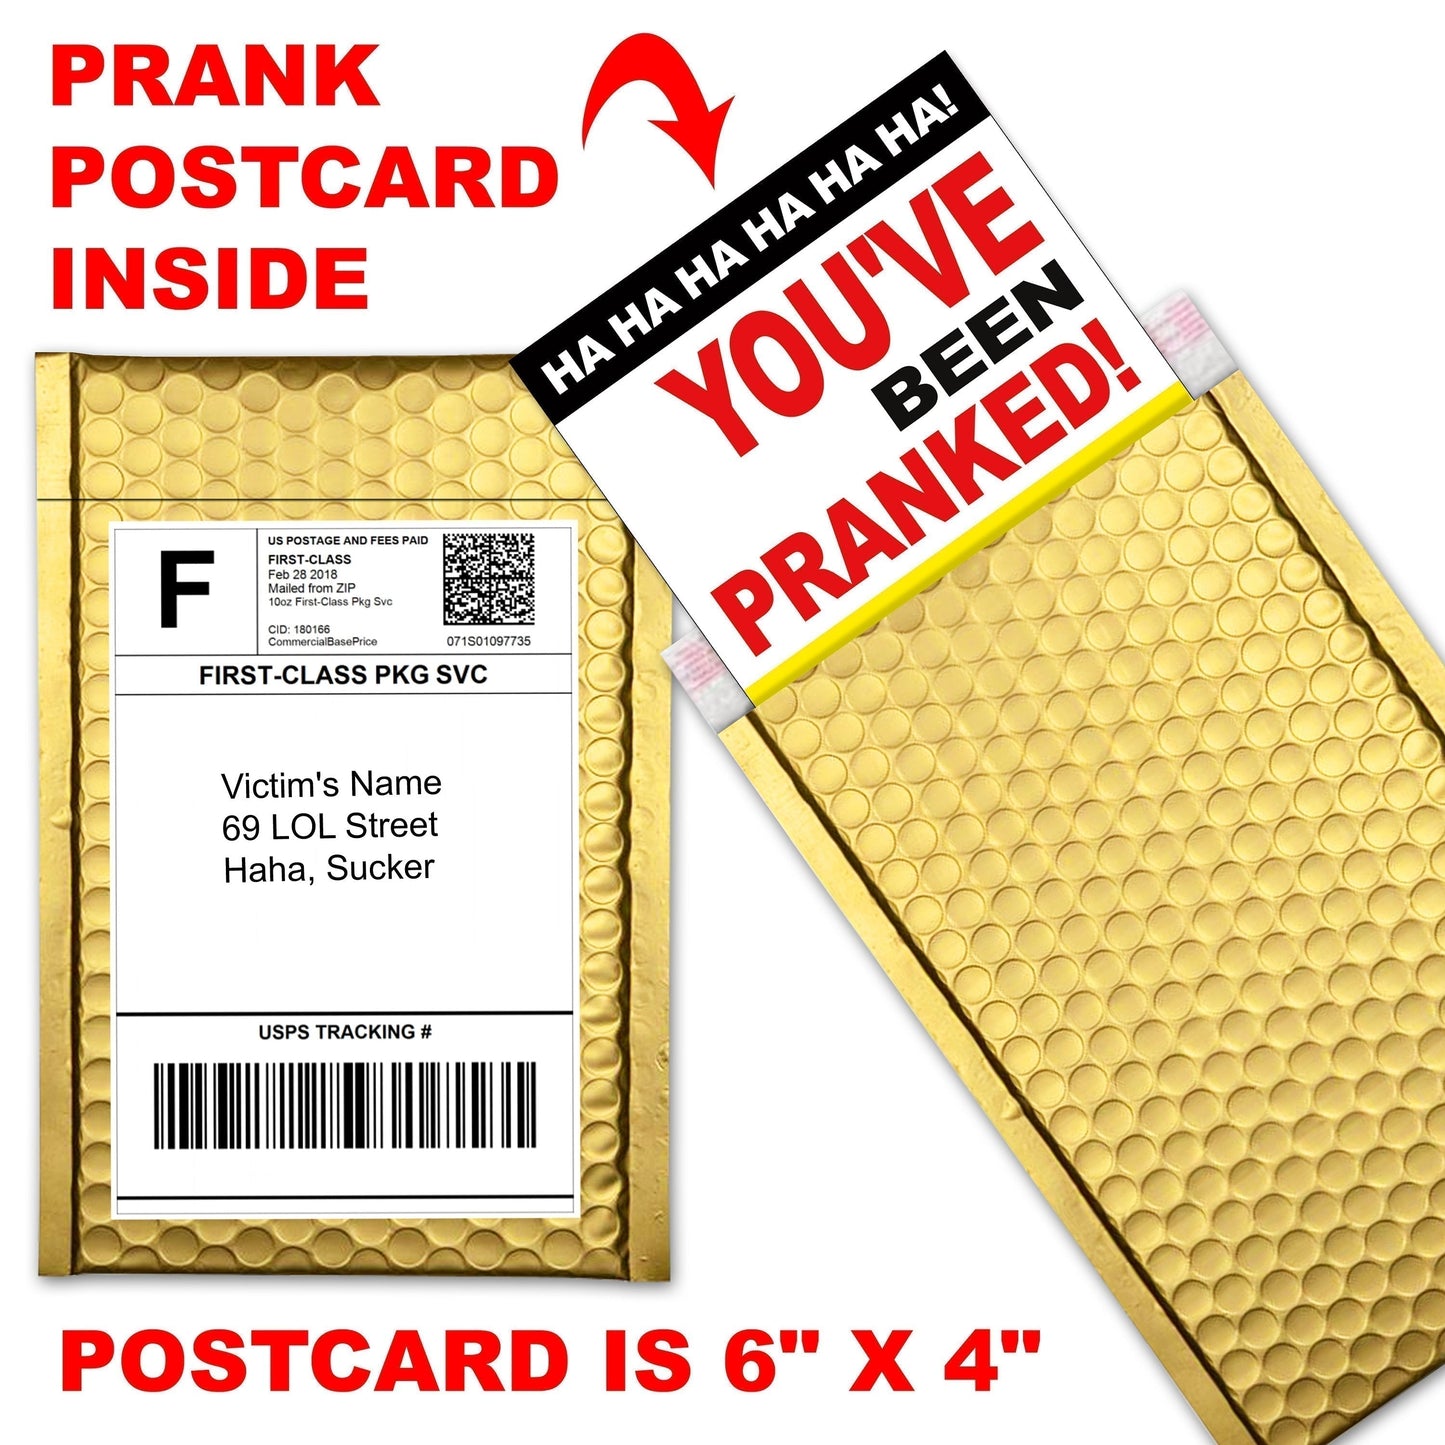 Gay Book Club embarrassing prank envelope gets mailed directly to your victims 100% anonymously!